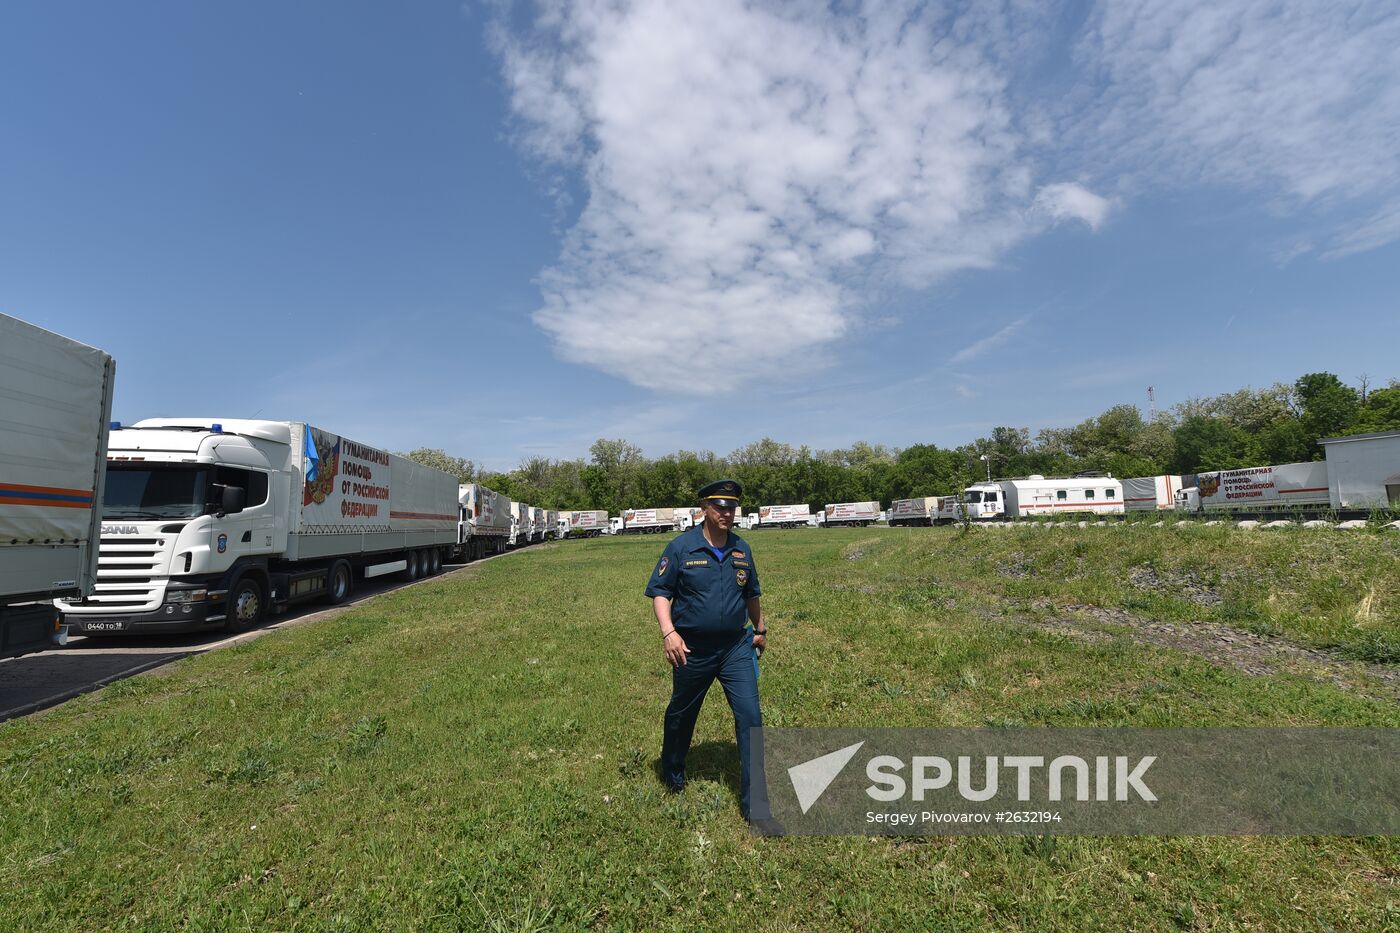 Humanitarian aid convoy for southeastern Ukraine about to depart from Rostov Region